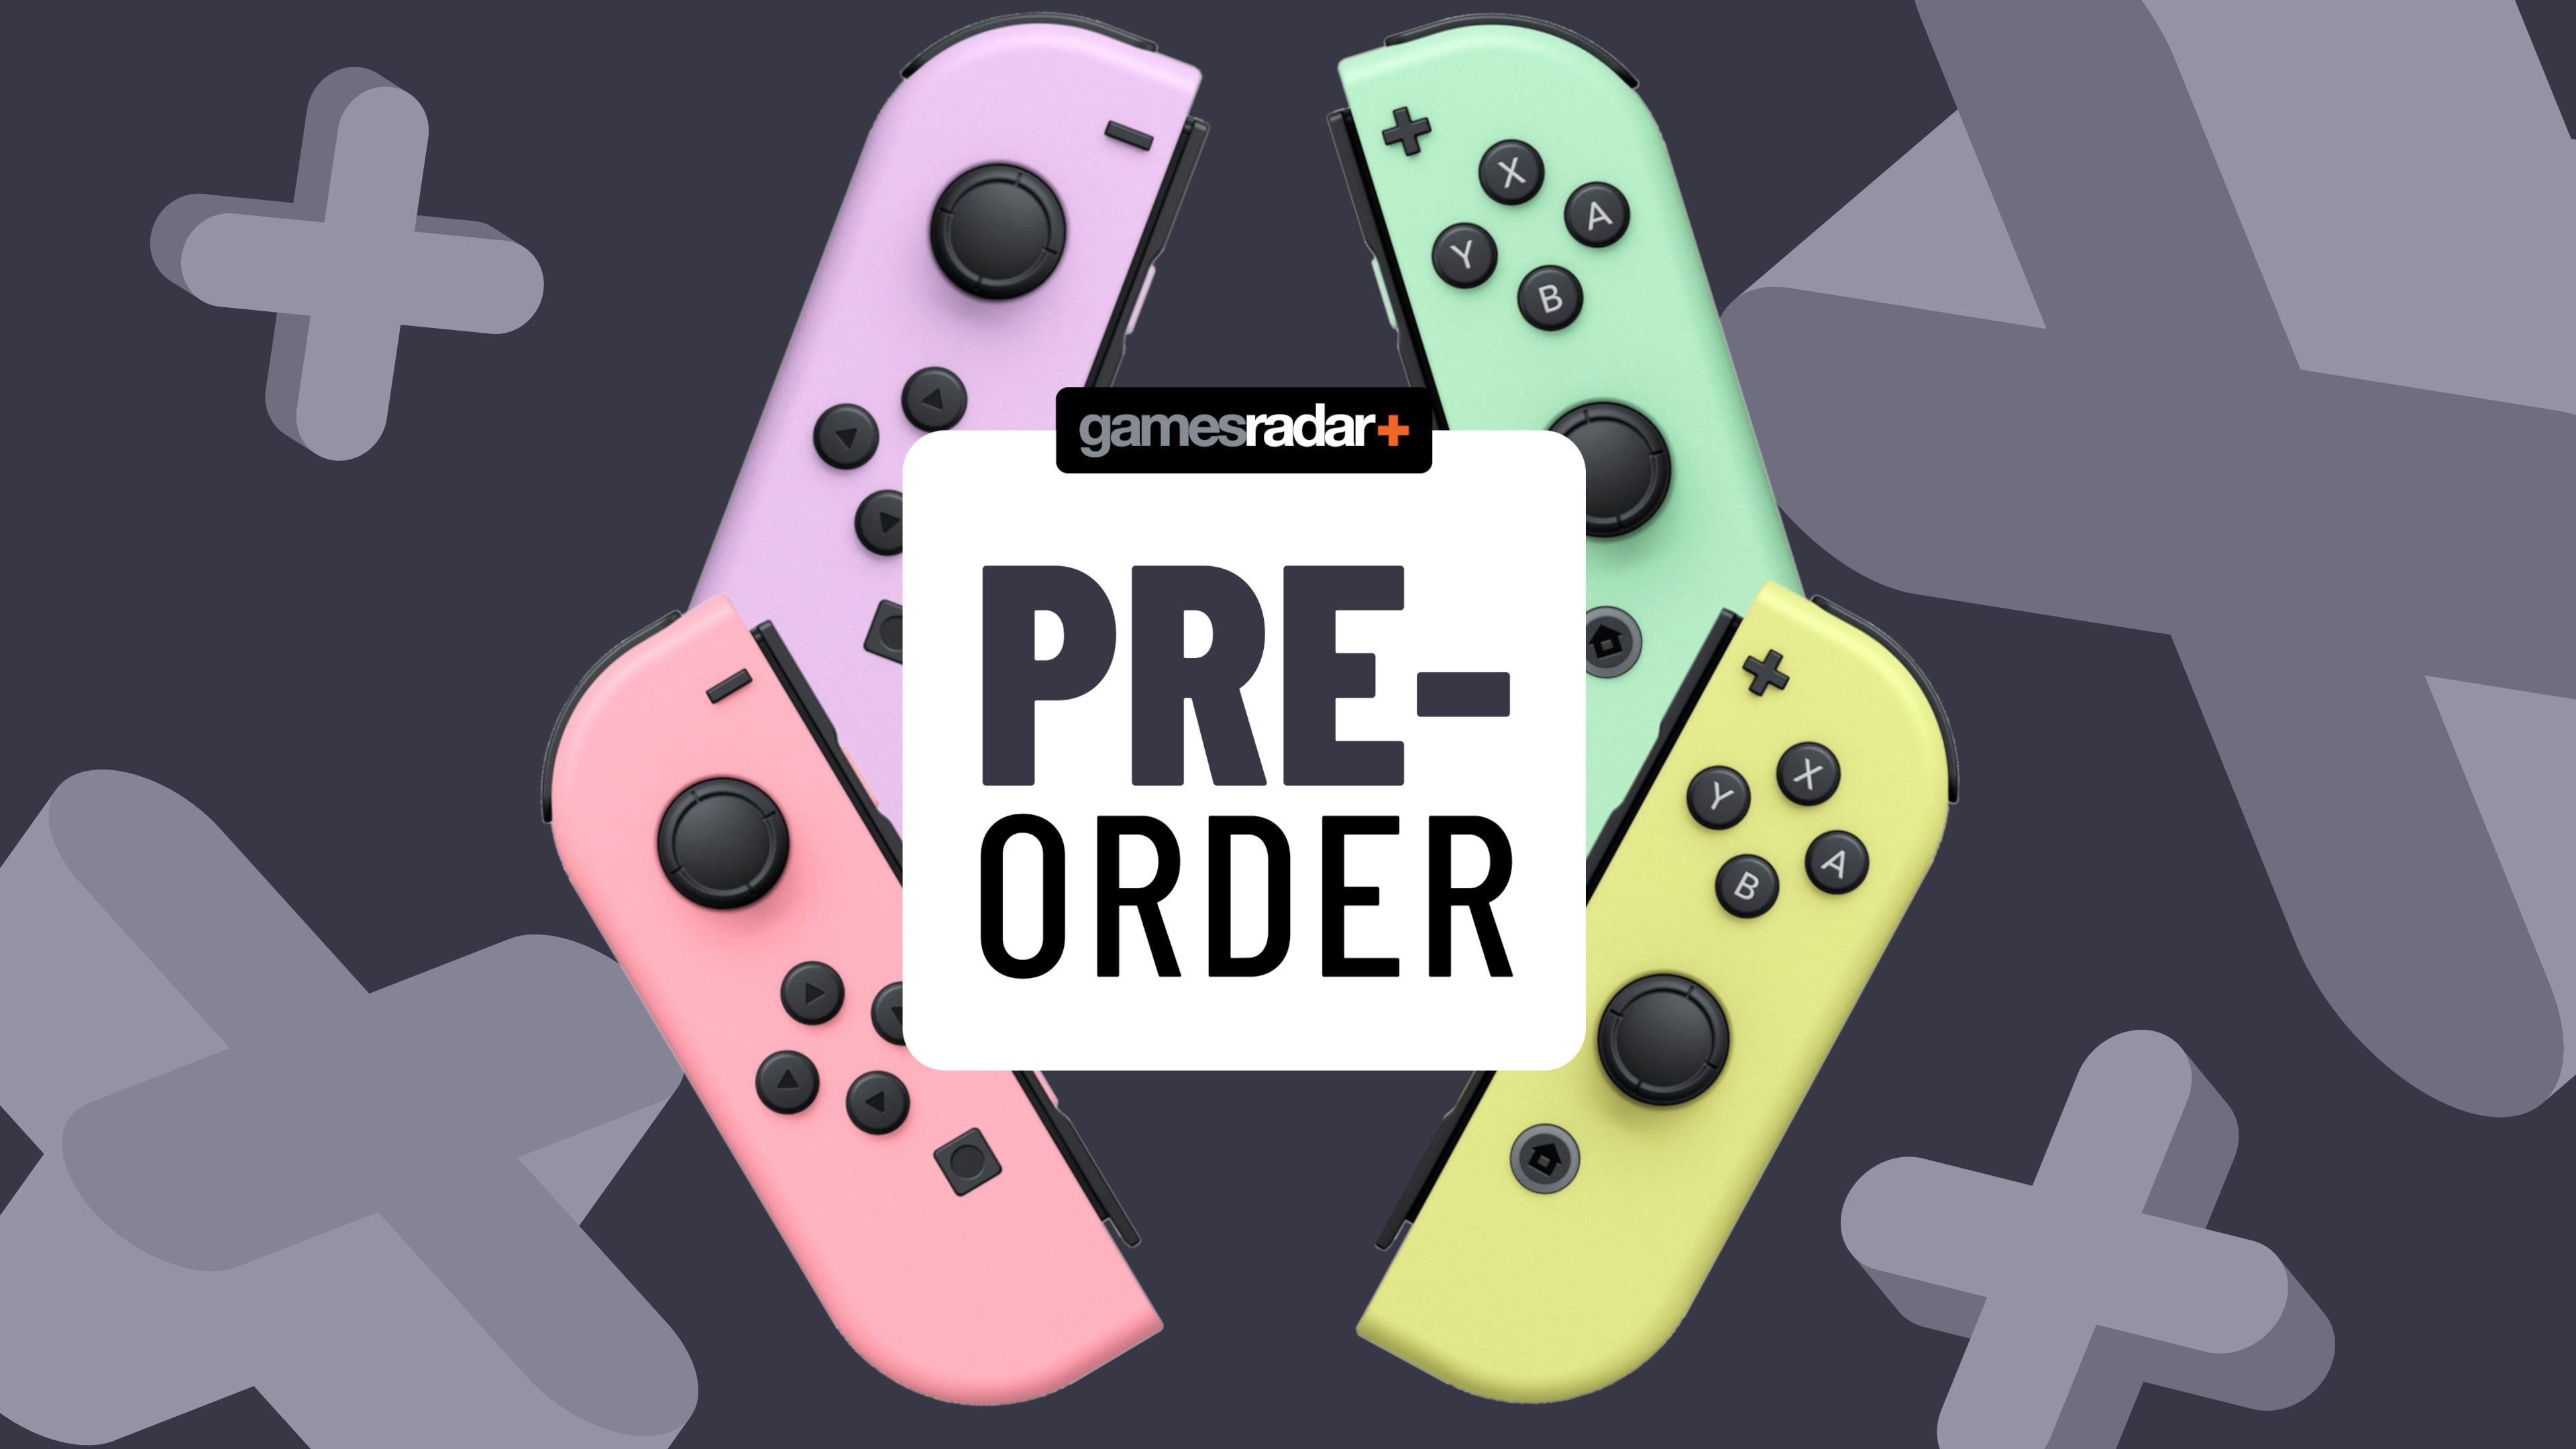 How to pre-order new Princess Peach pink Joy-Cons in the UK